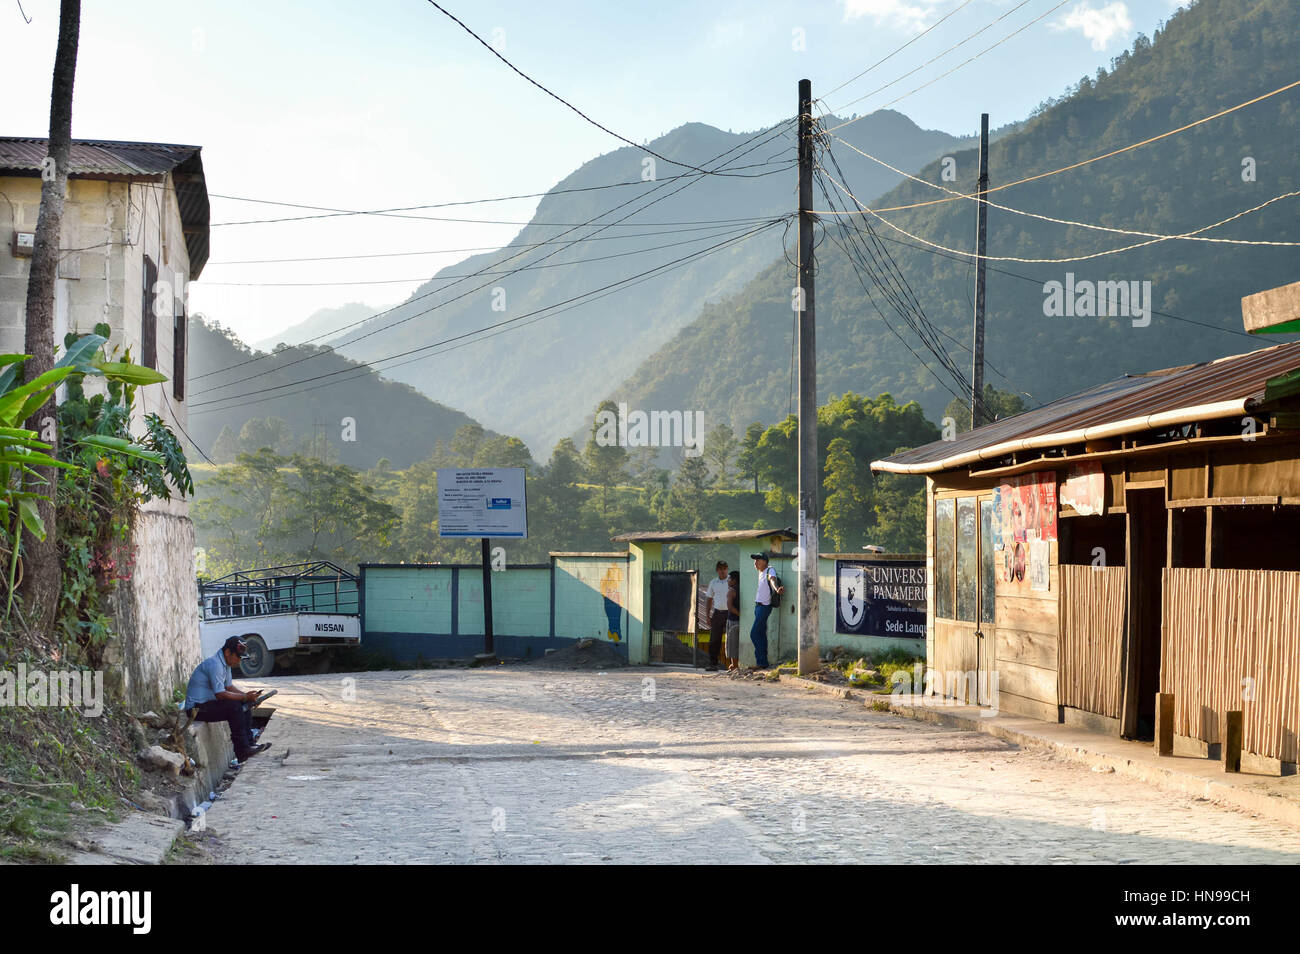 Lanquin, Guatemala - February, 22 2015: The small town of Lanquin is lit by sunlight with the mountains of Alta Verapaz region seen on the background, Stock Photo